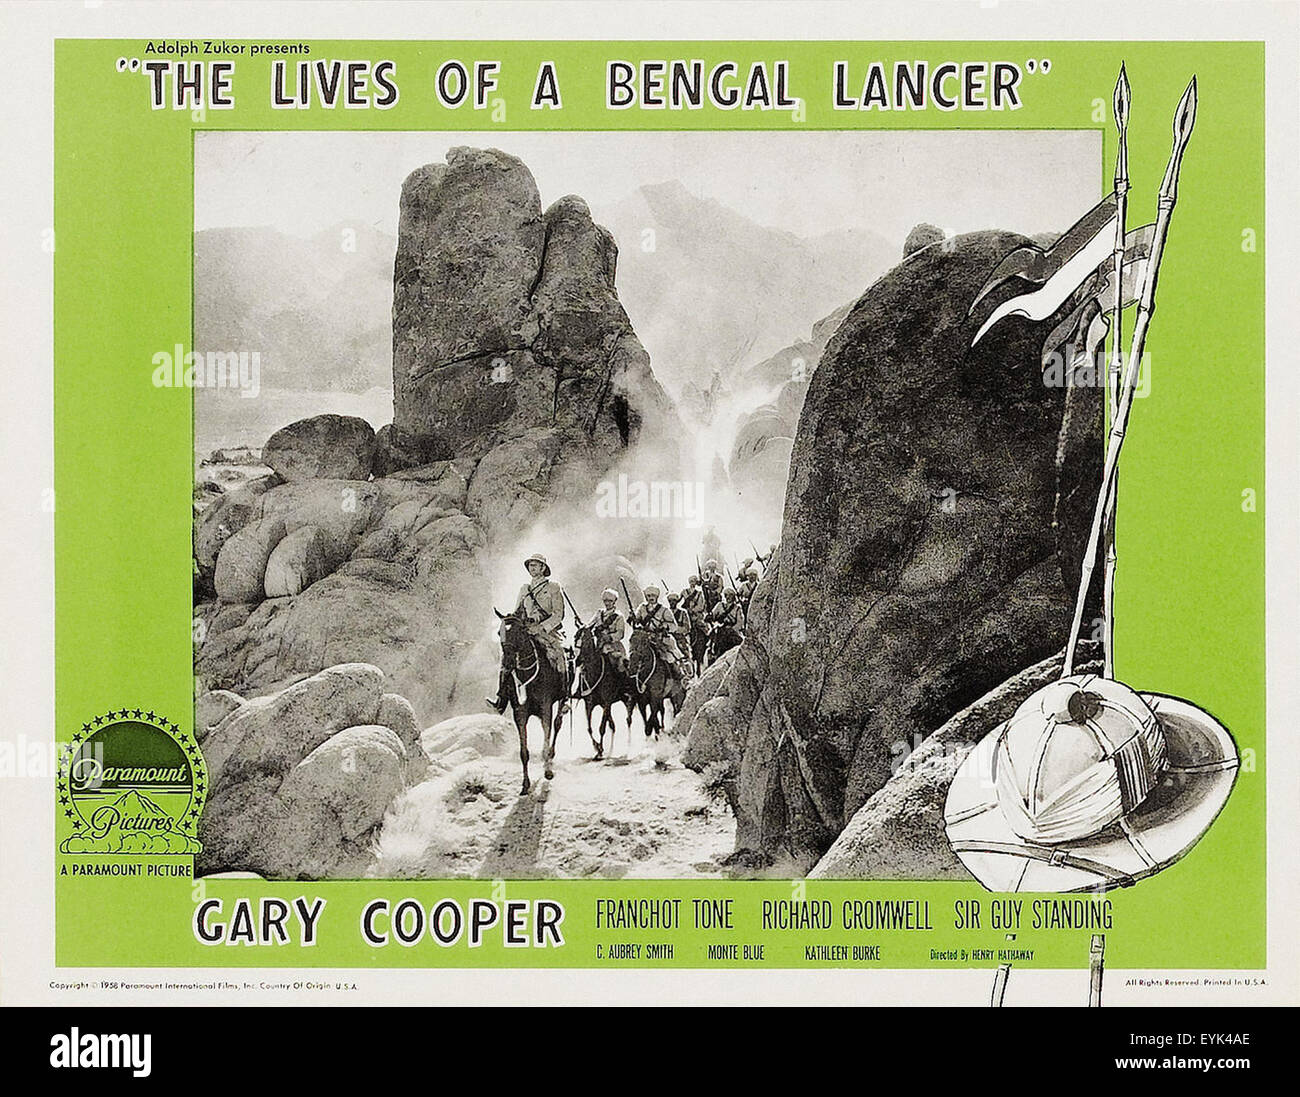 The Lives of a Bengal Lancer - Movie Poster Stock Photo